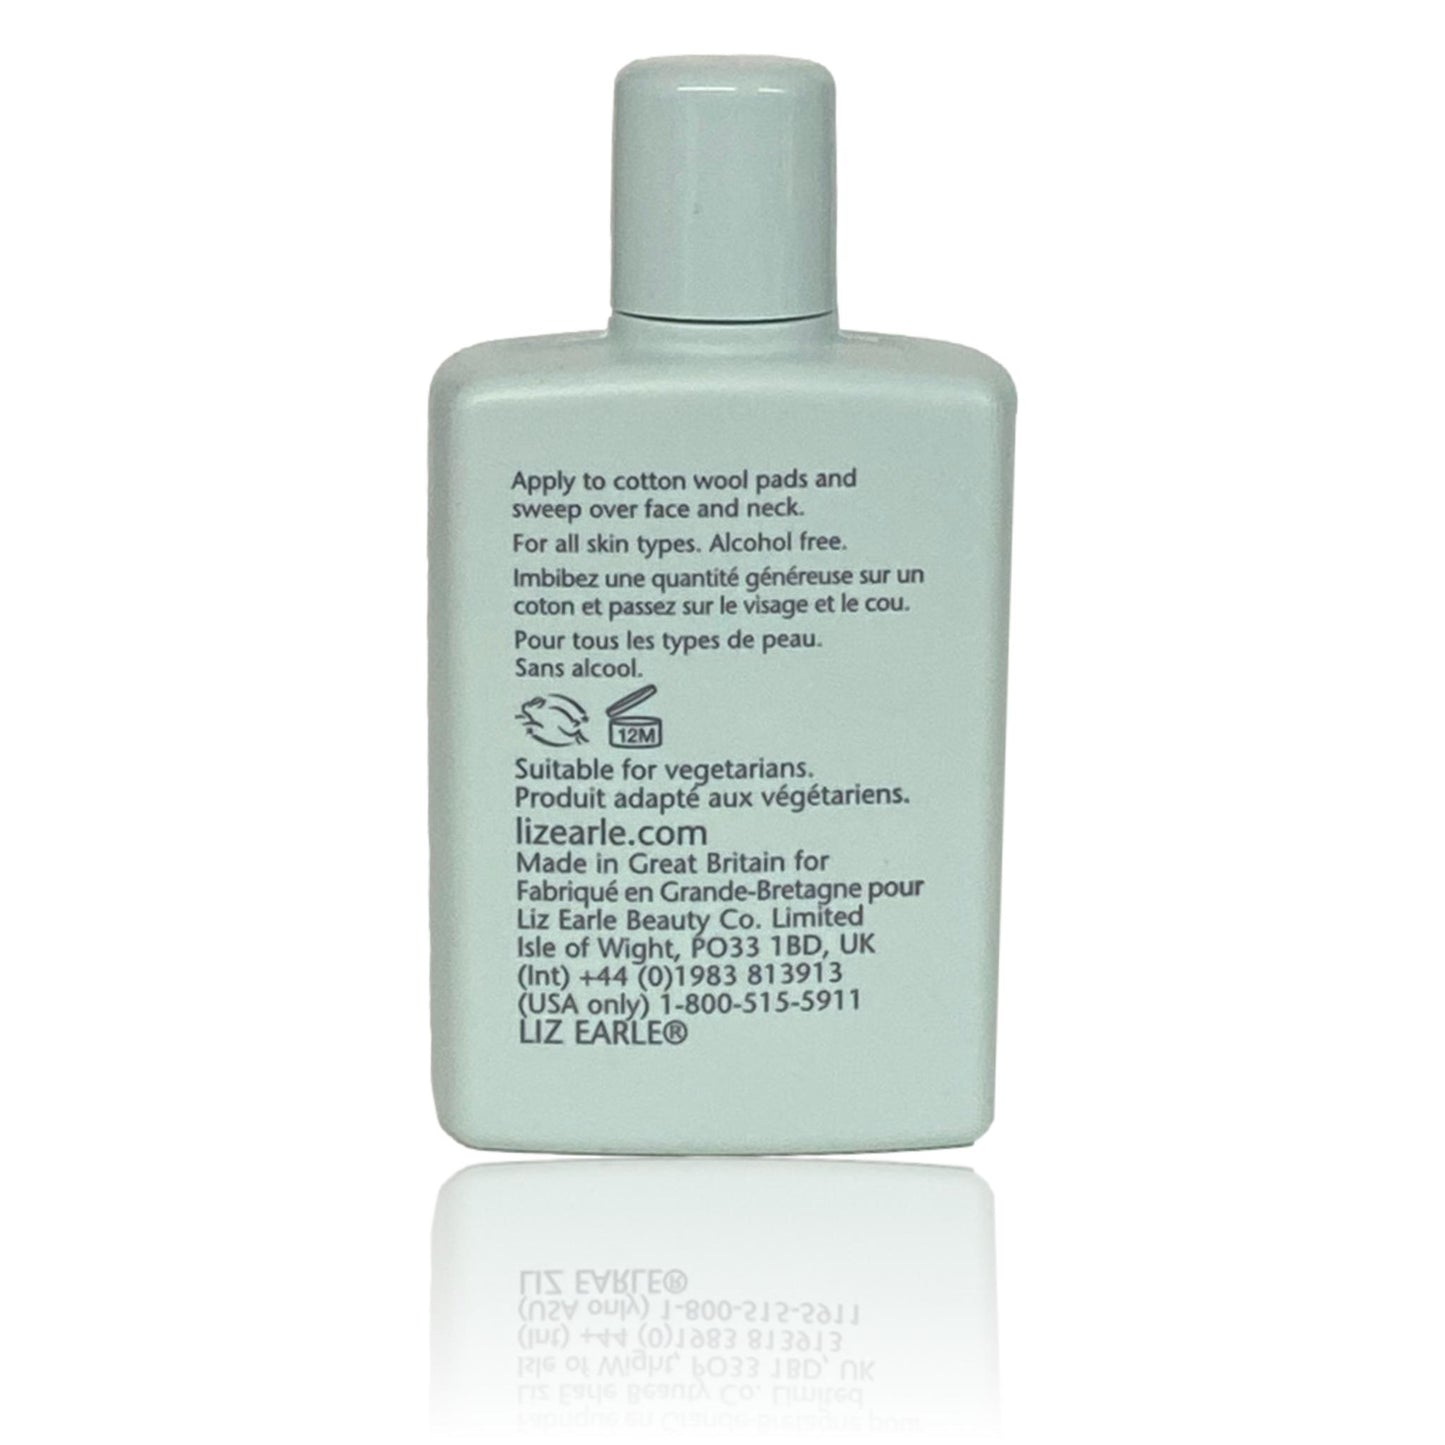 Liz Earle Instant Boost Skin Tonic 50ml travel size bottle Discontinued.